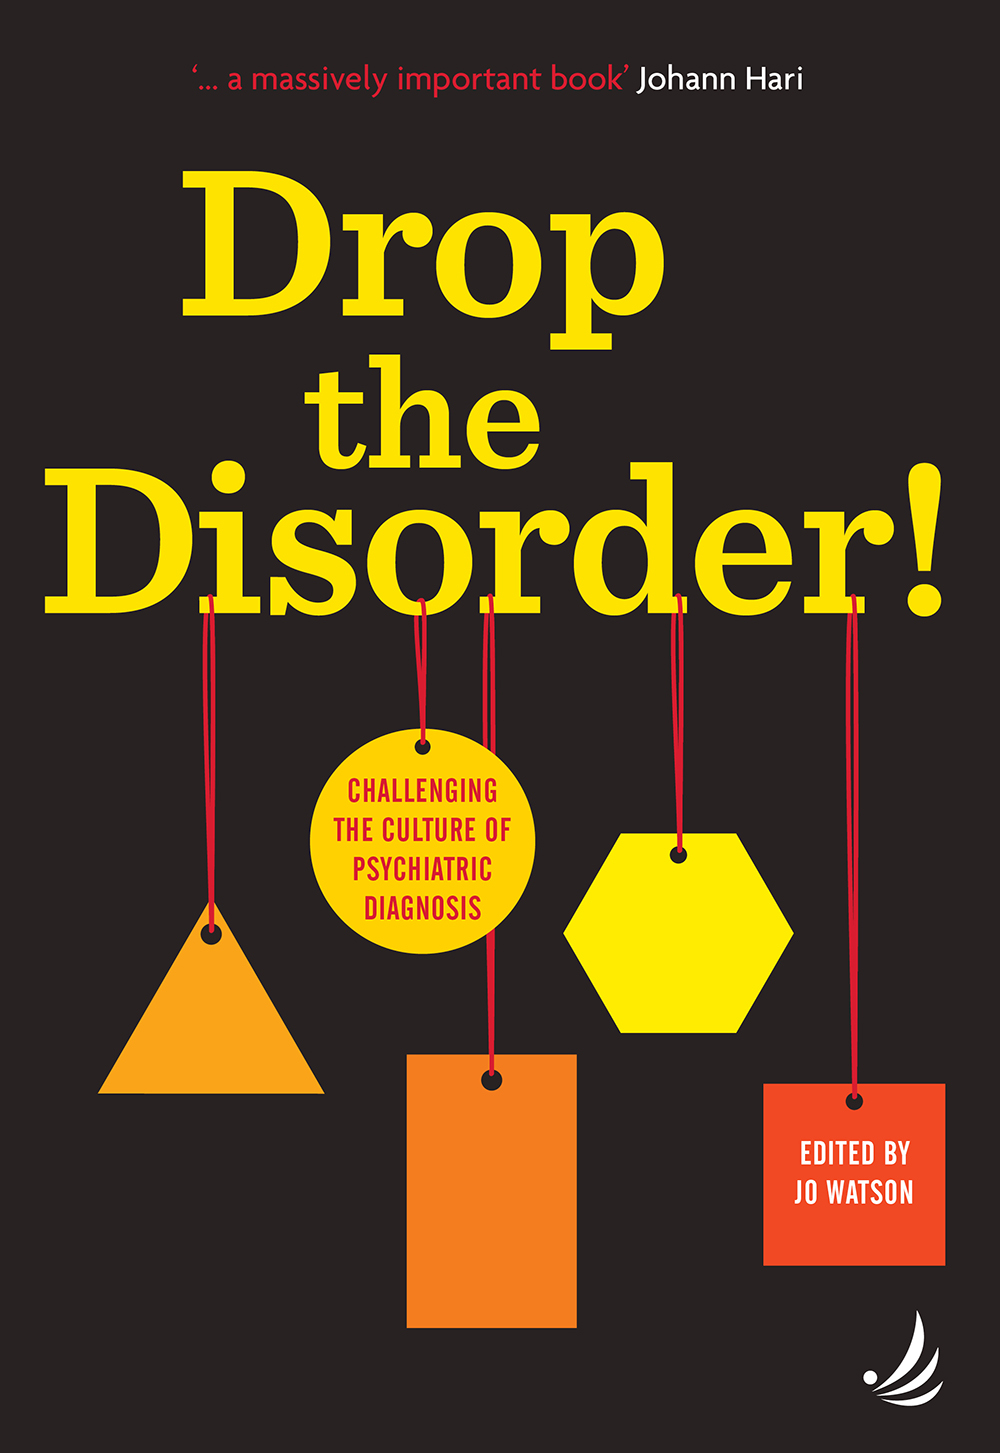 Drop the Disorder! Challenging the culture of psychiatric diagnosis